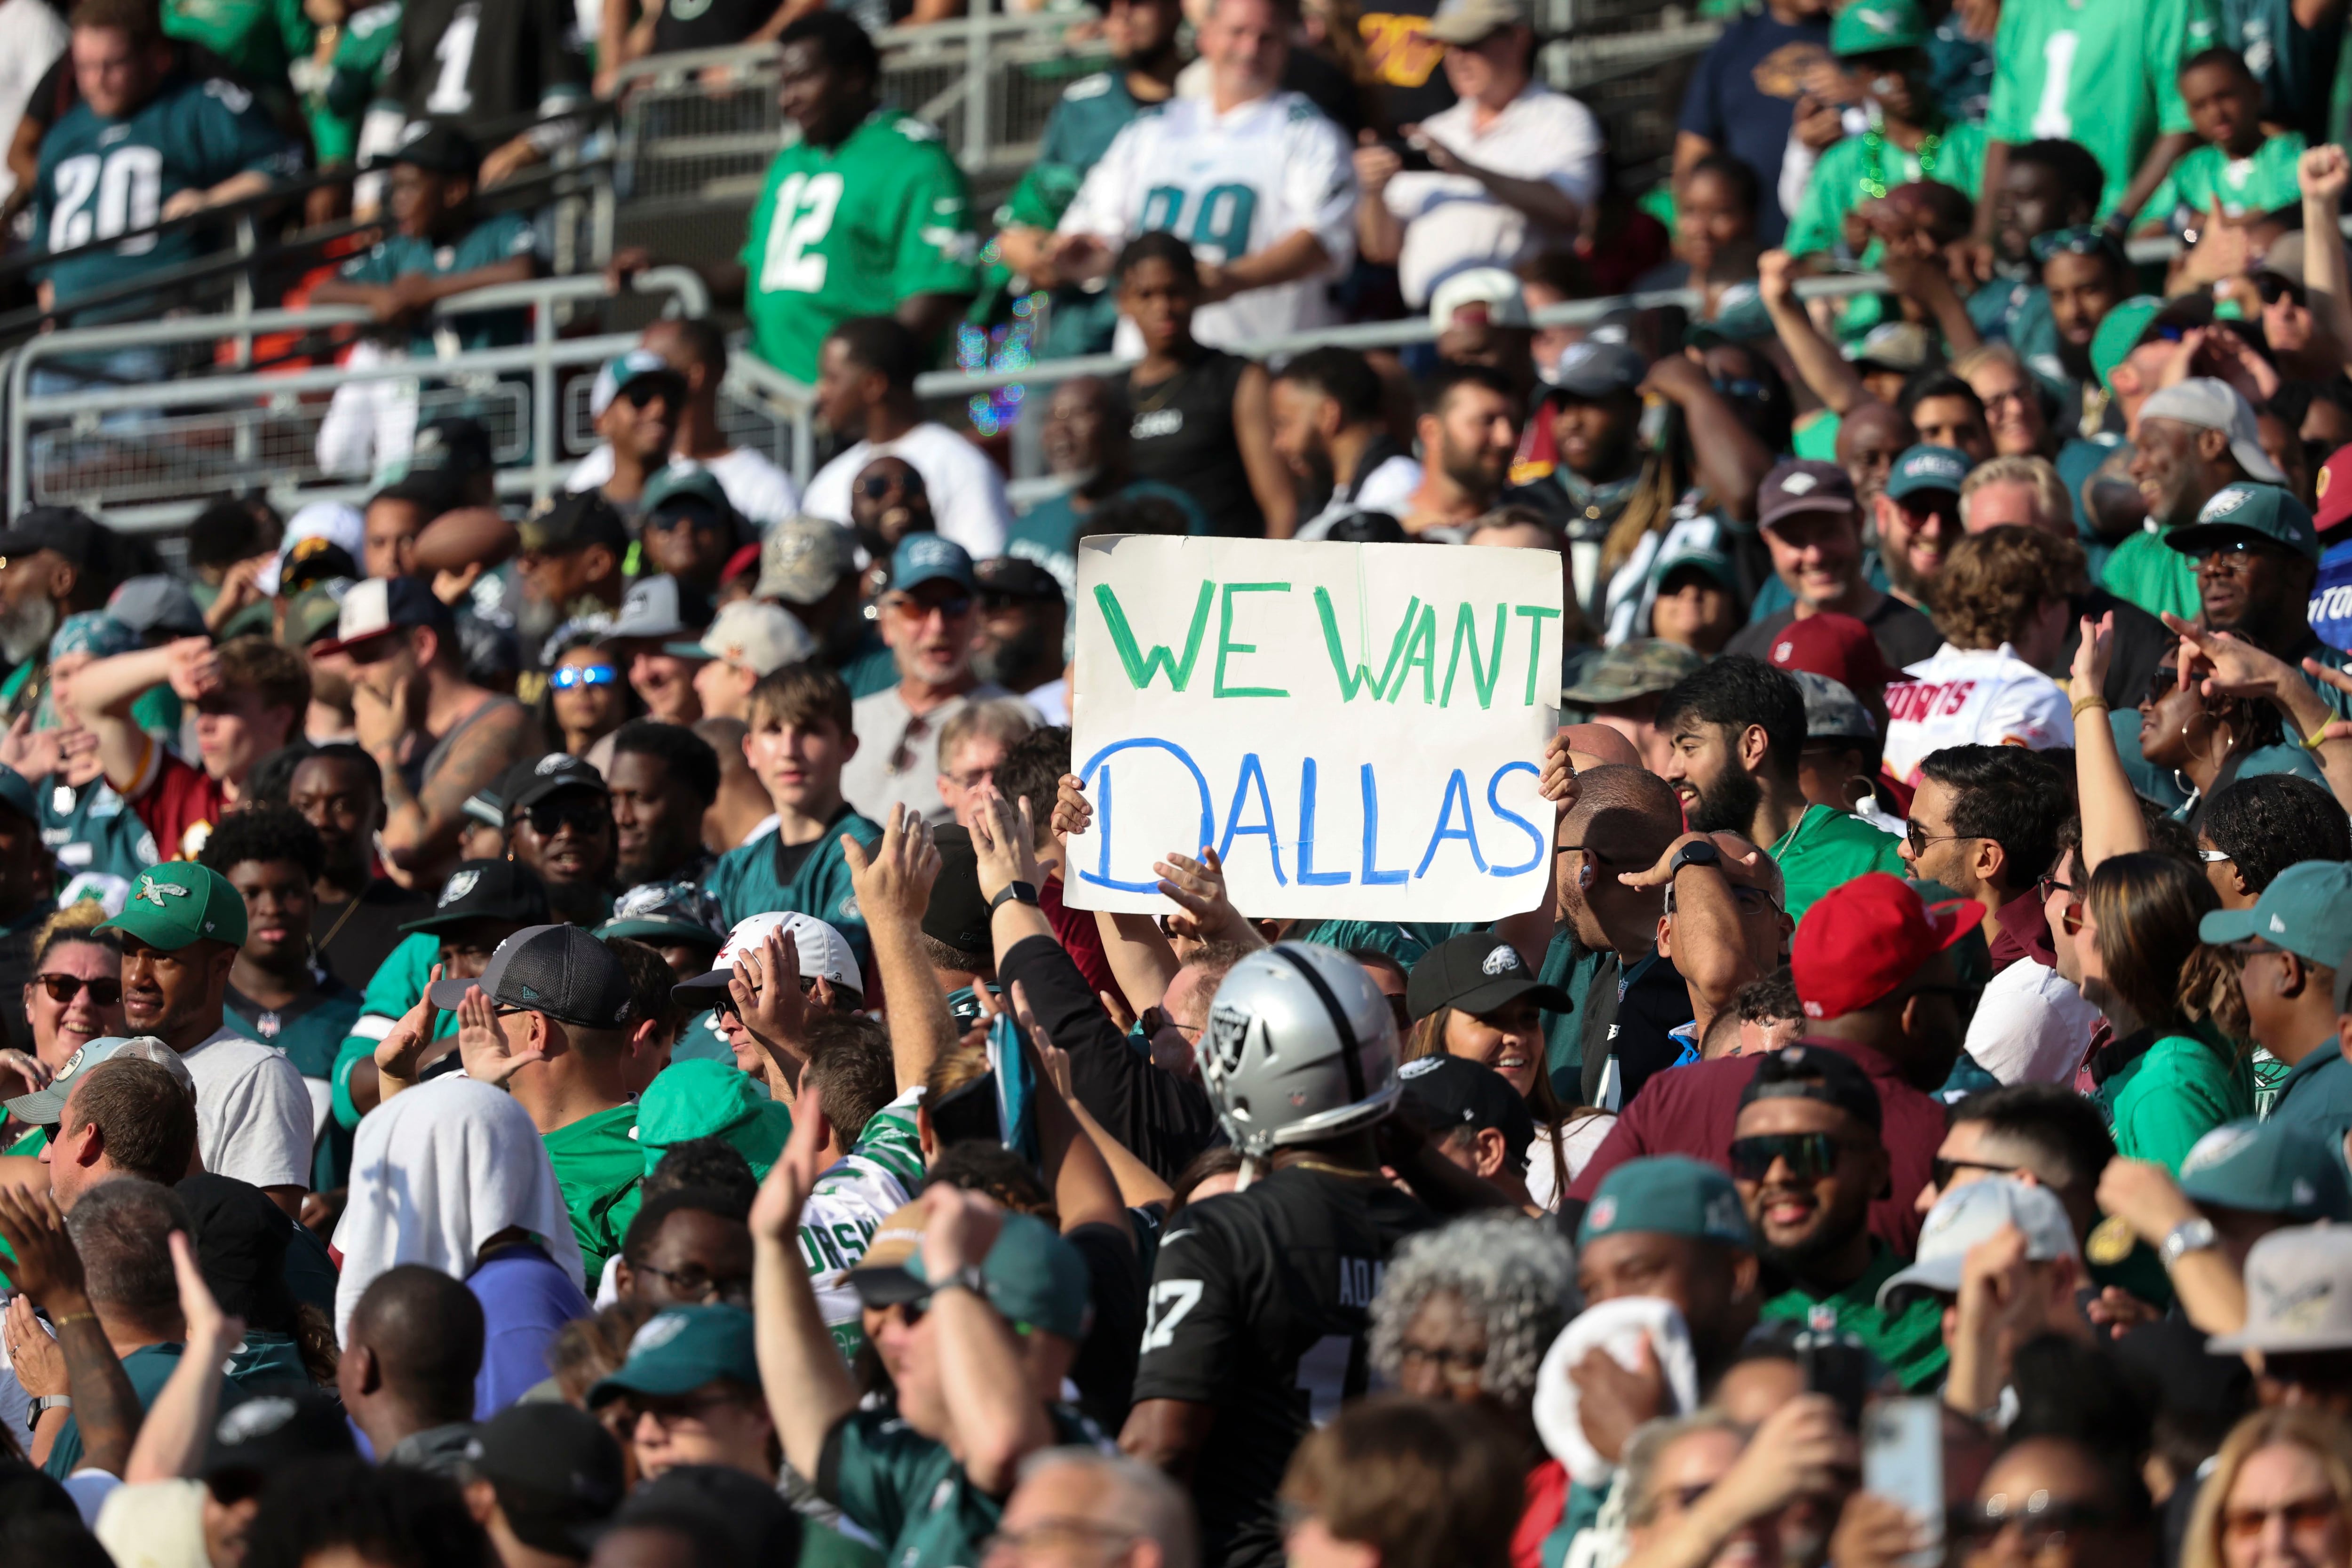 Philadelphia Eagles Fans: What It Means to “Bleed Green